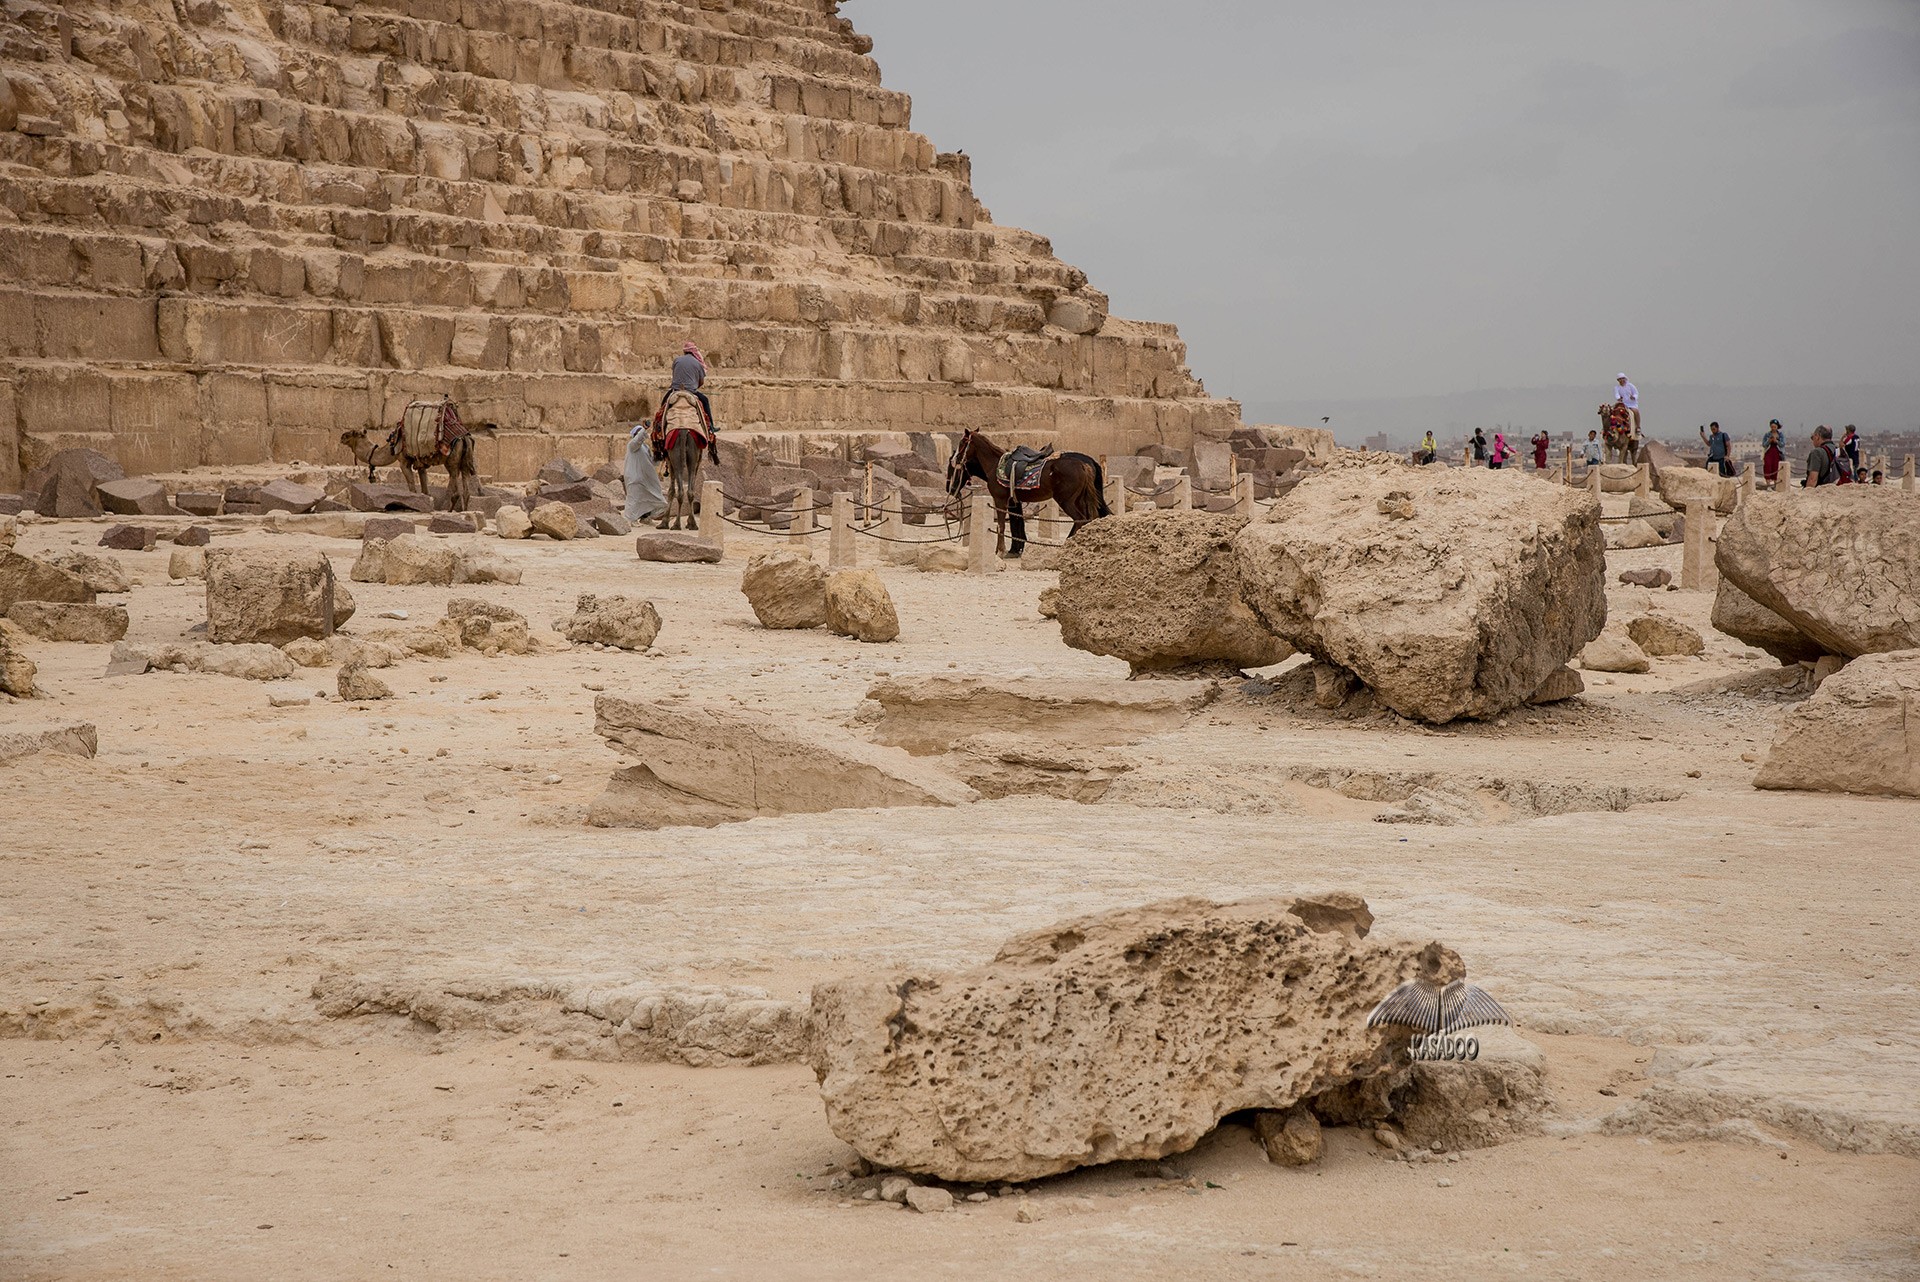 Remainings of the great Pyramid